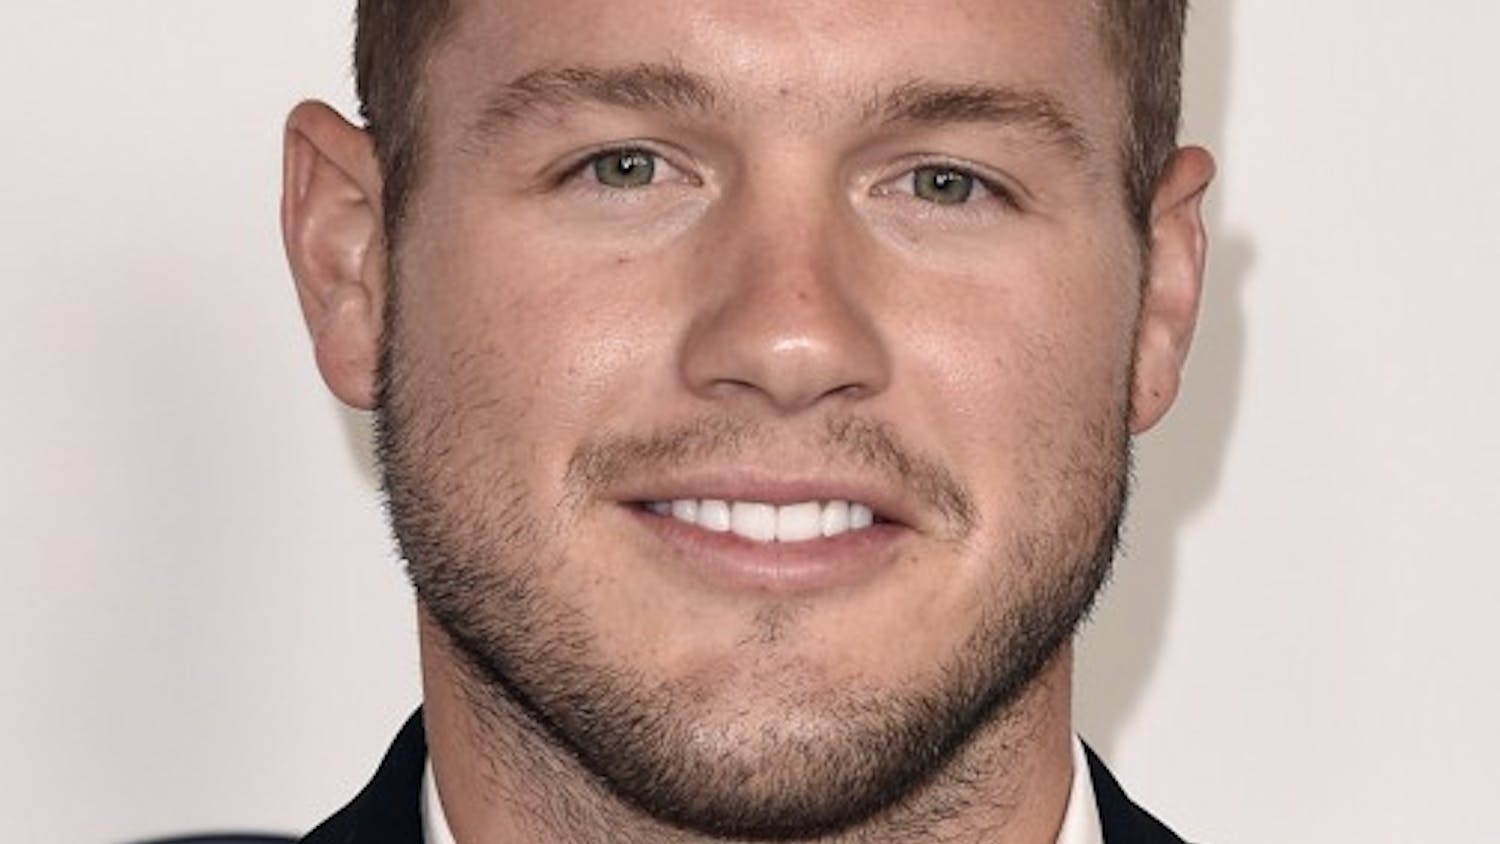 Colton Underwood at the Disney ABC 2018 Summer Press Tour at the Beverly Hilton on August 7, 2018 in Beverly Hills, California. (Scott Kirkland/PictureGroup/Sipa USA/TNS)